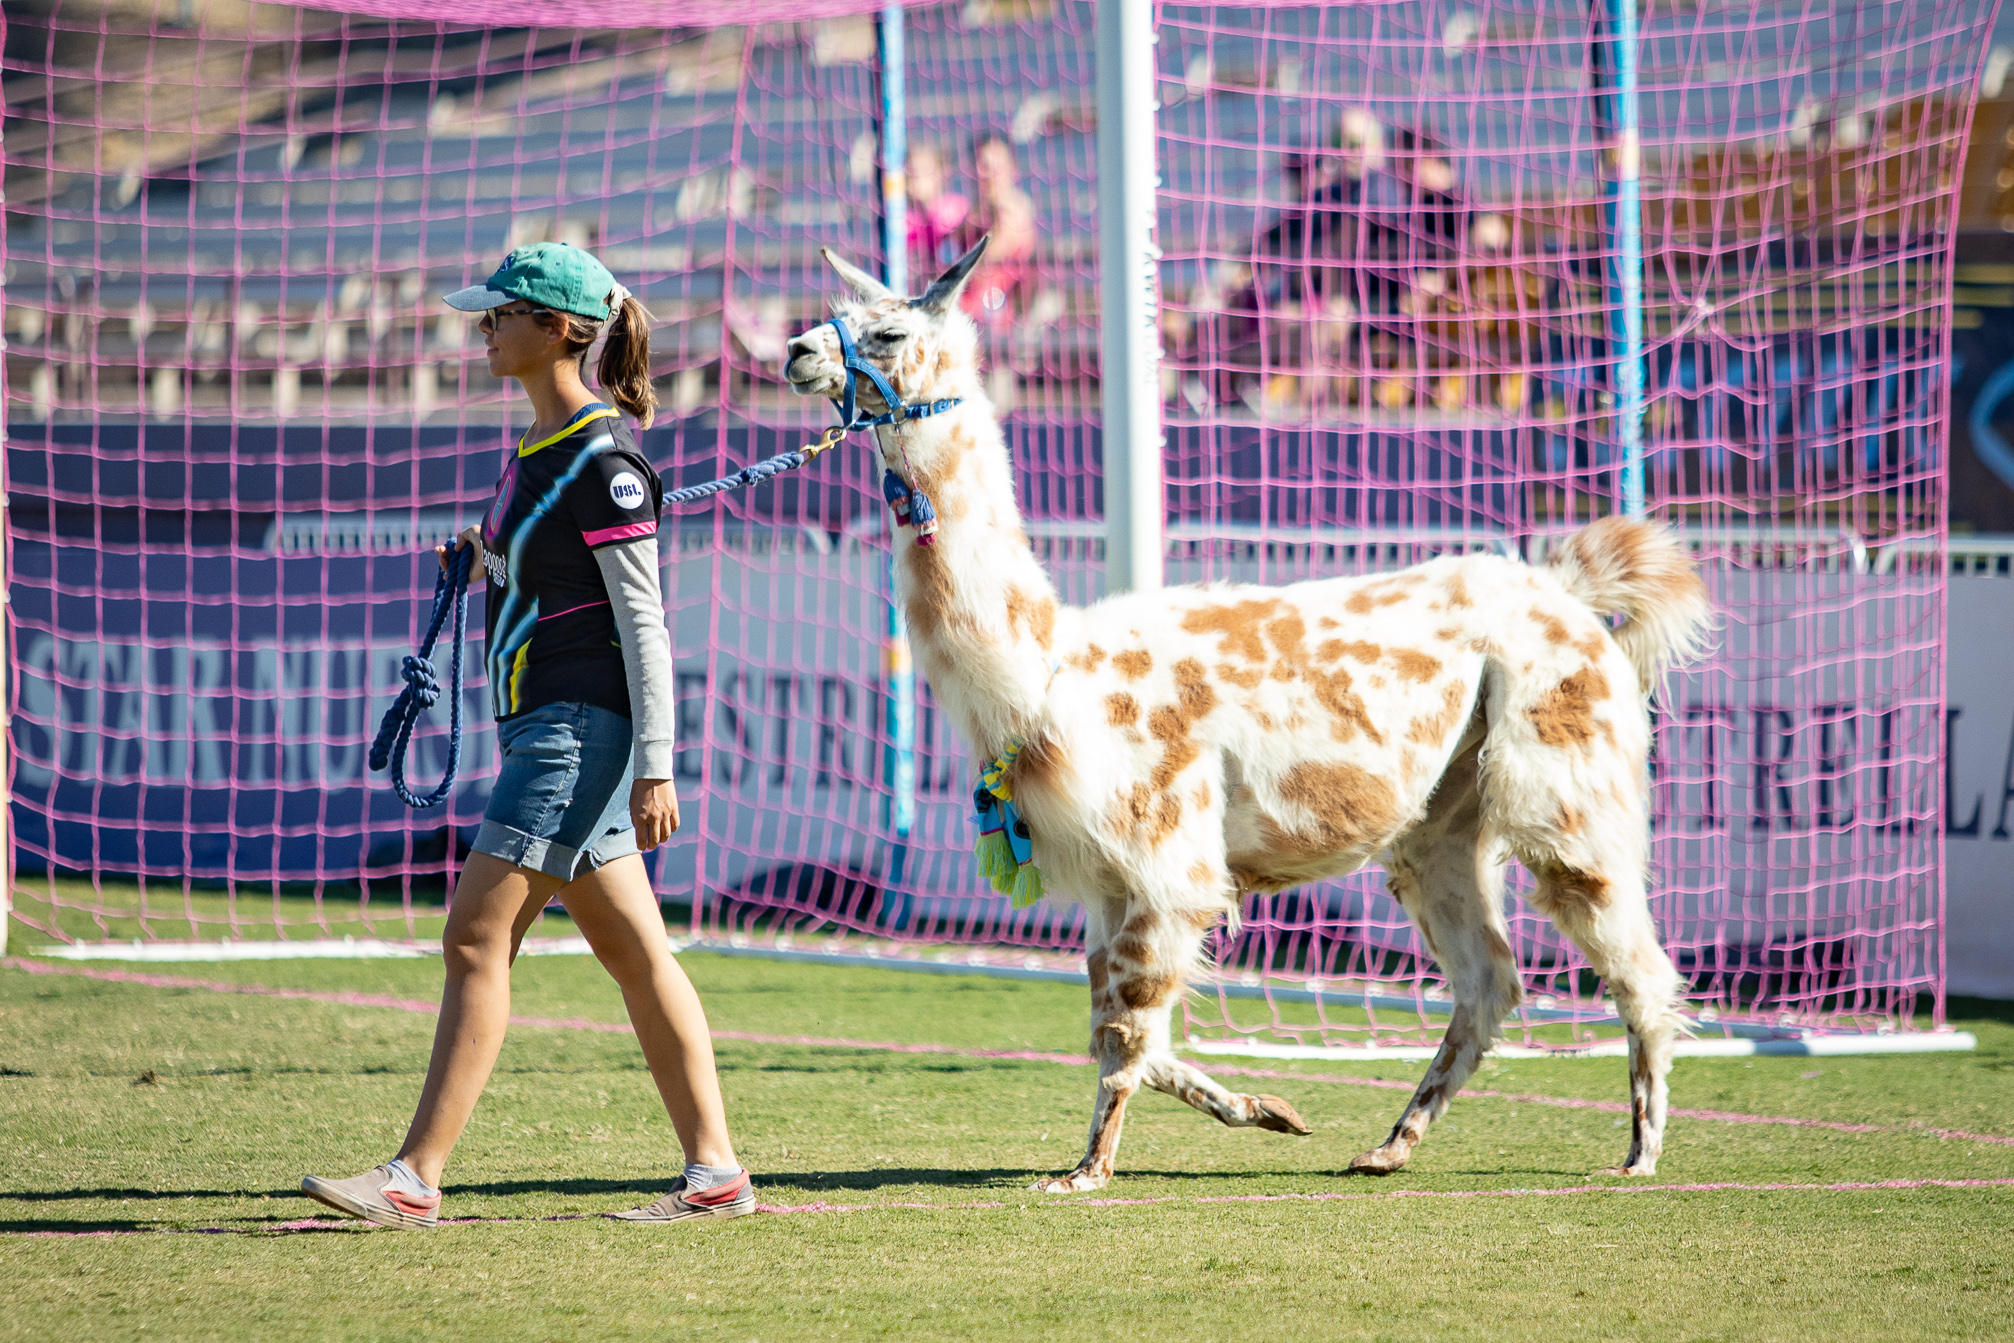 Since the team's inception, Lights have used live llamas as mascots of the club.